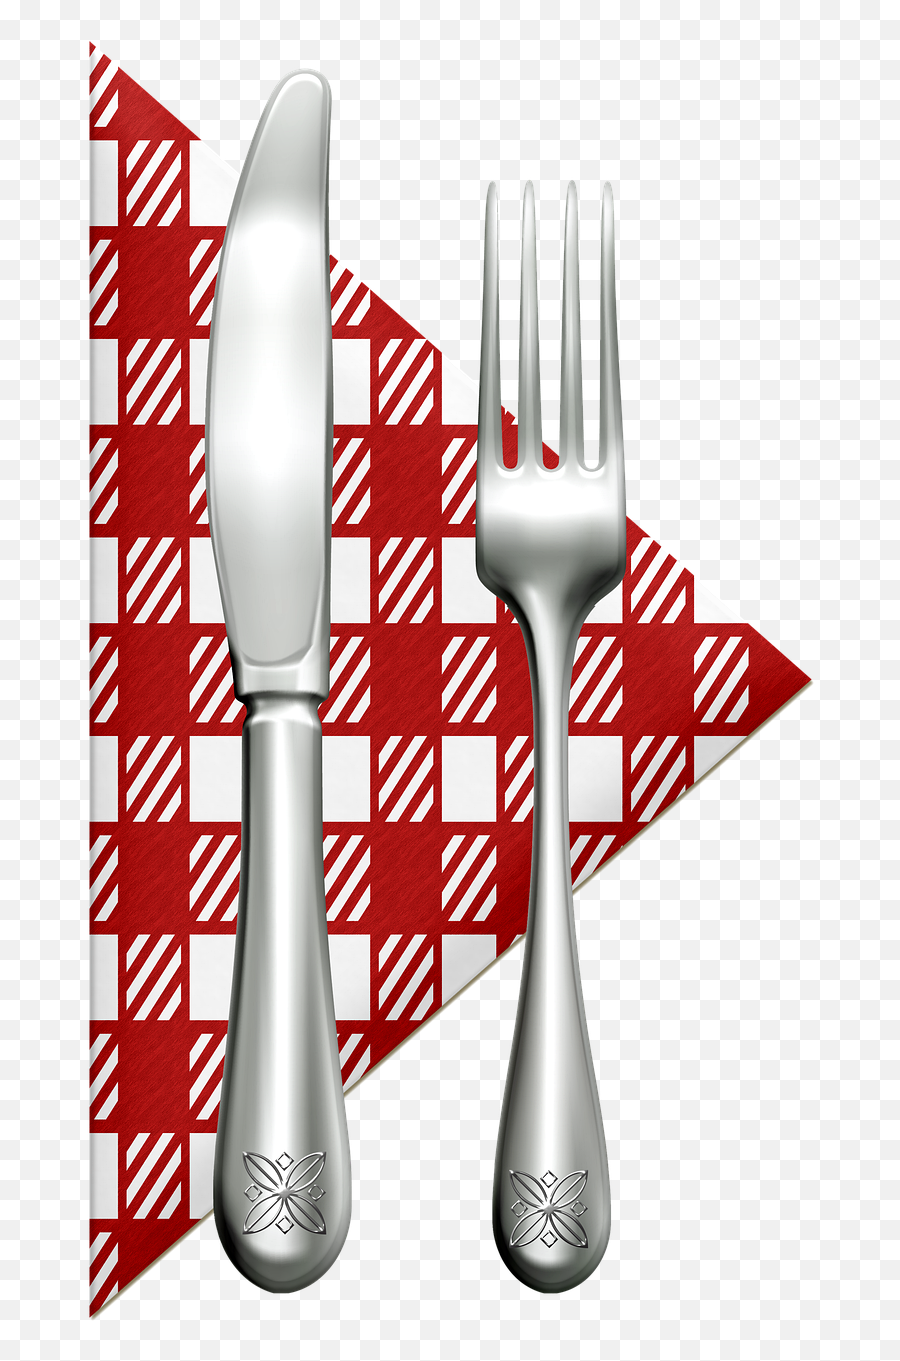 Silverware Knife Fork - Free Image On Pixabay Guardanapo E Talher Png,Napkin Png